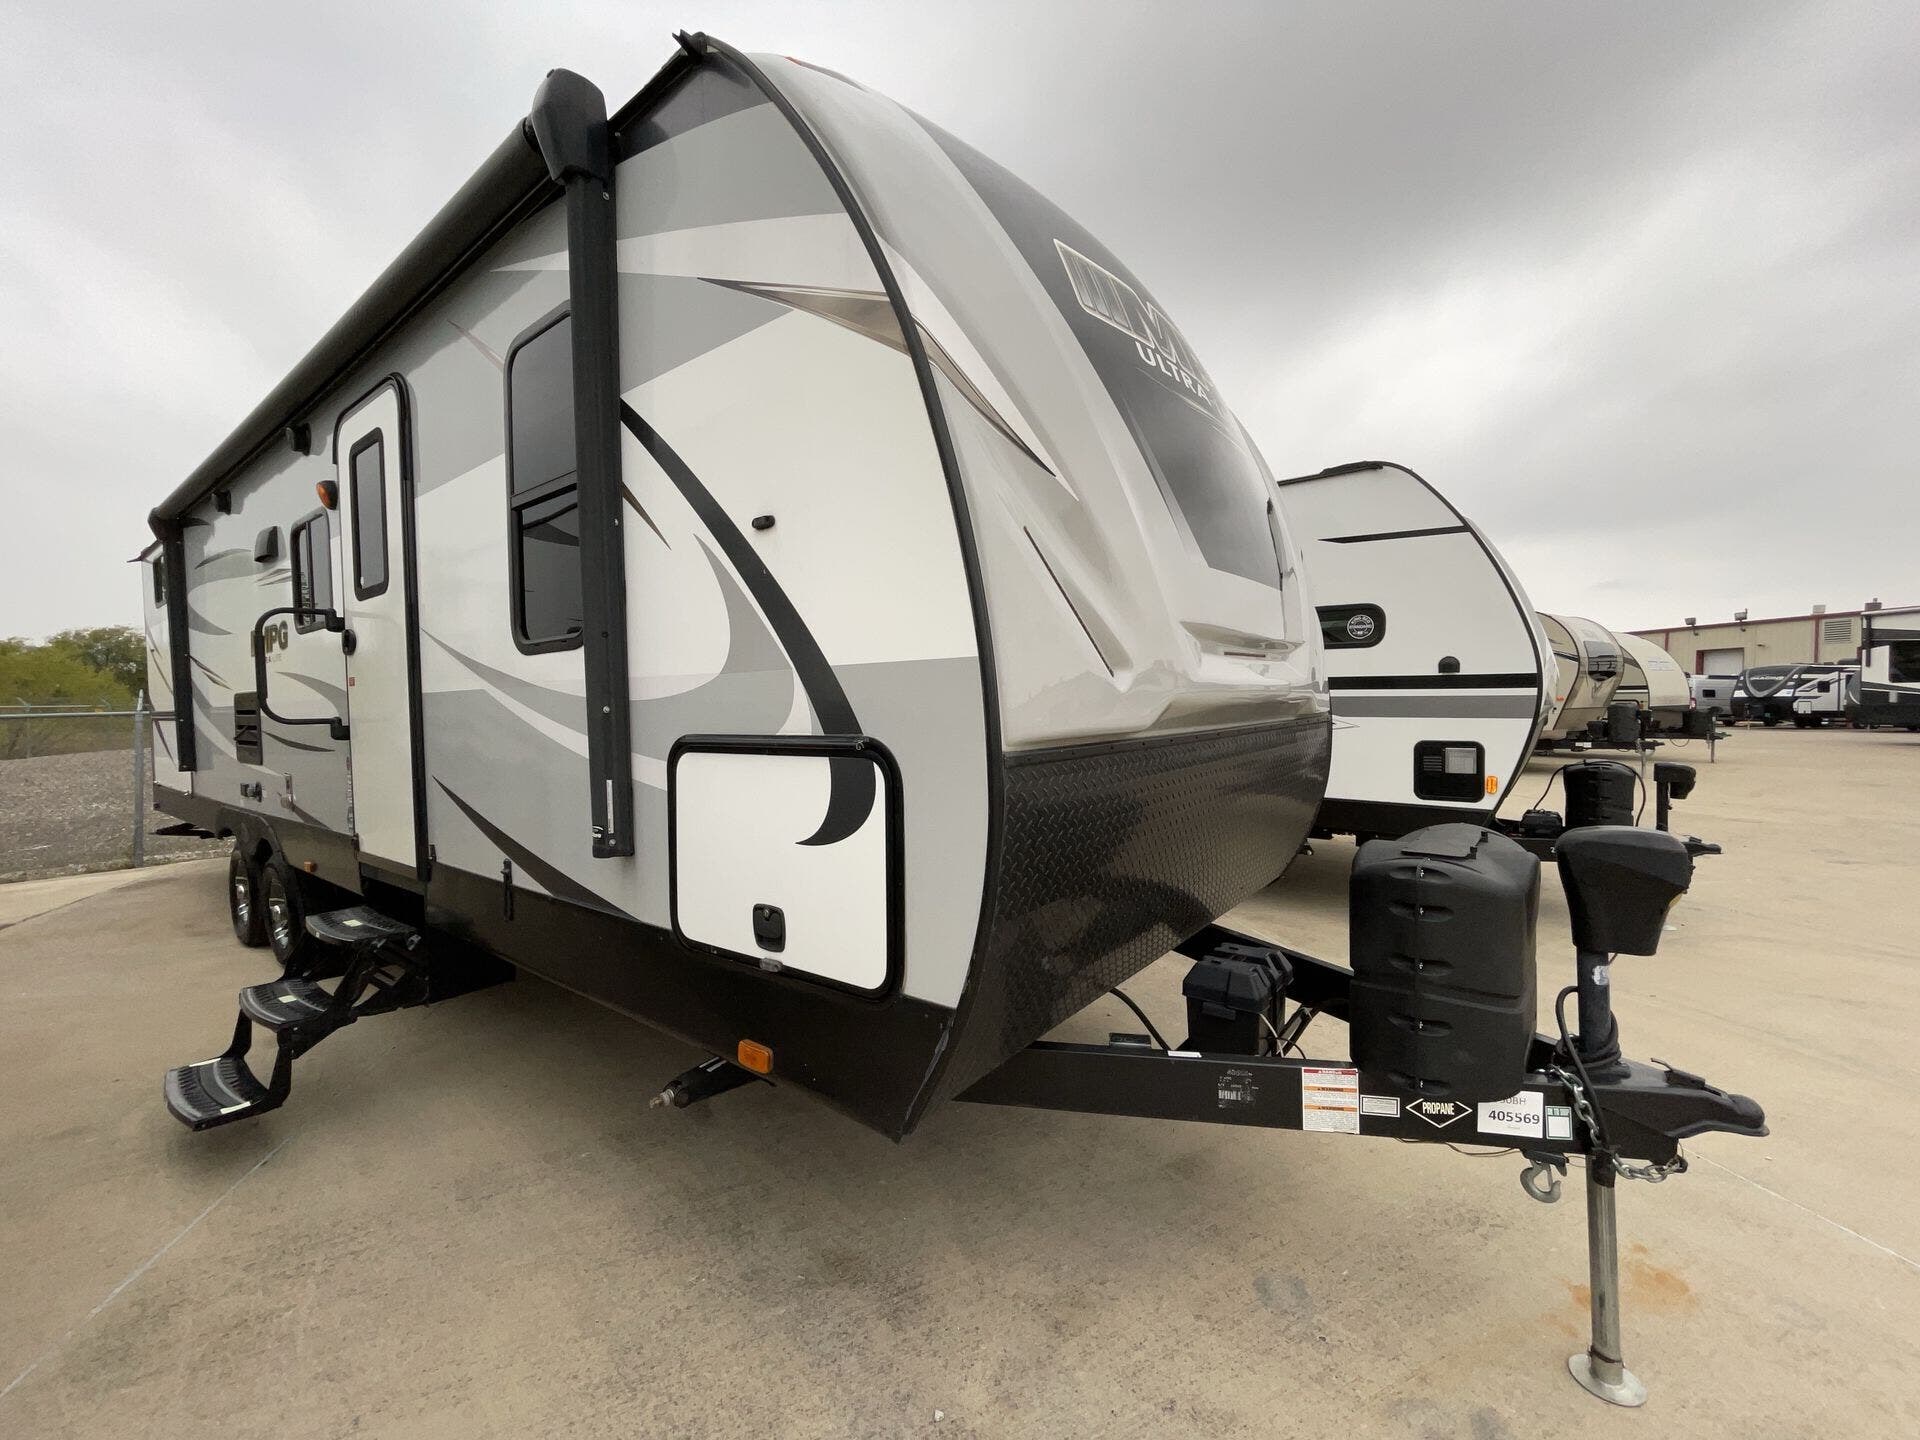 used mpg travel trailer for sale